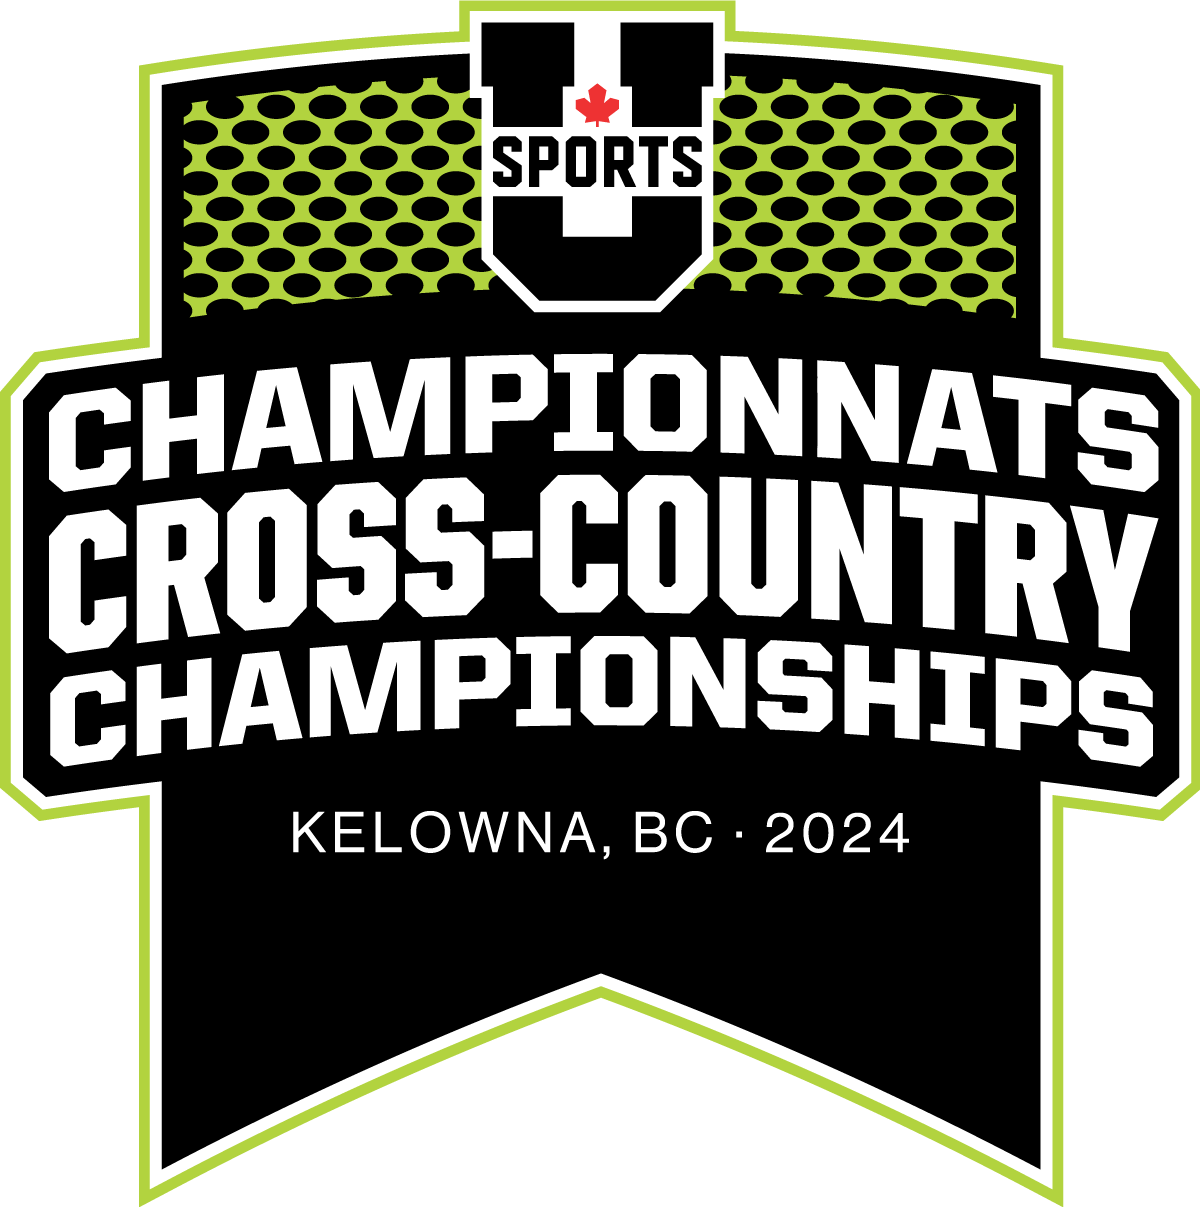 USports_Champ2425_crossCountry_Primary_CMYK_BL.png (90 KB)